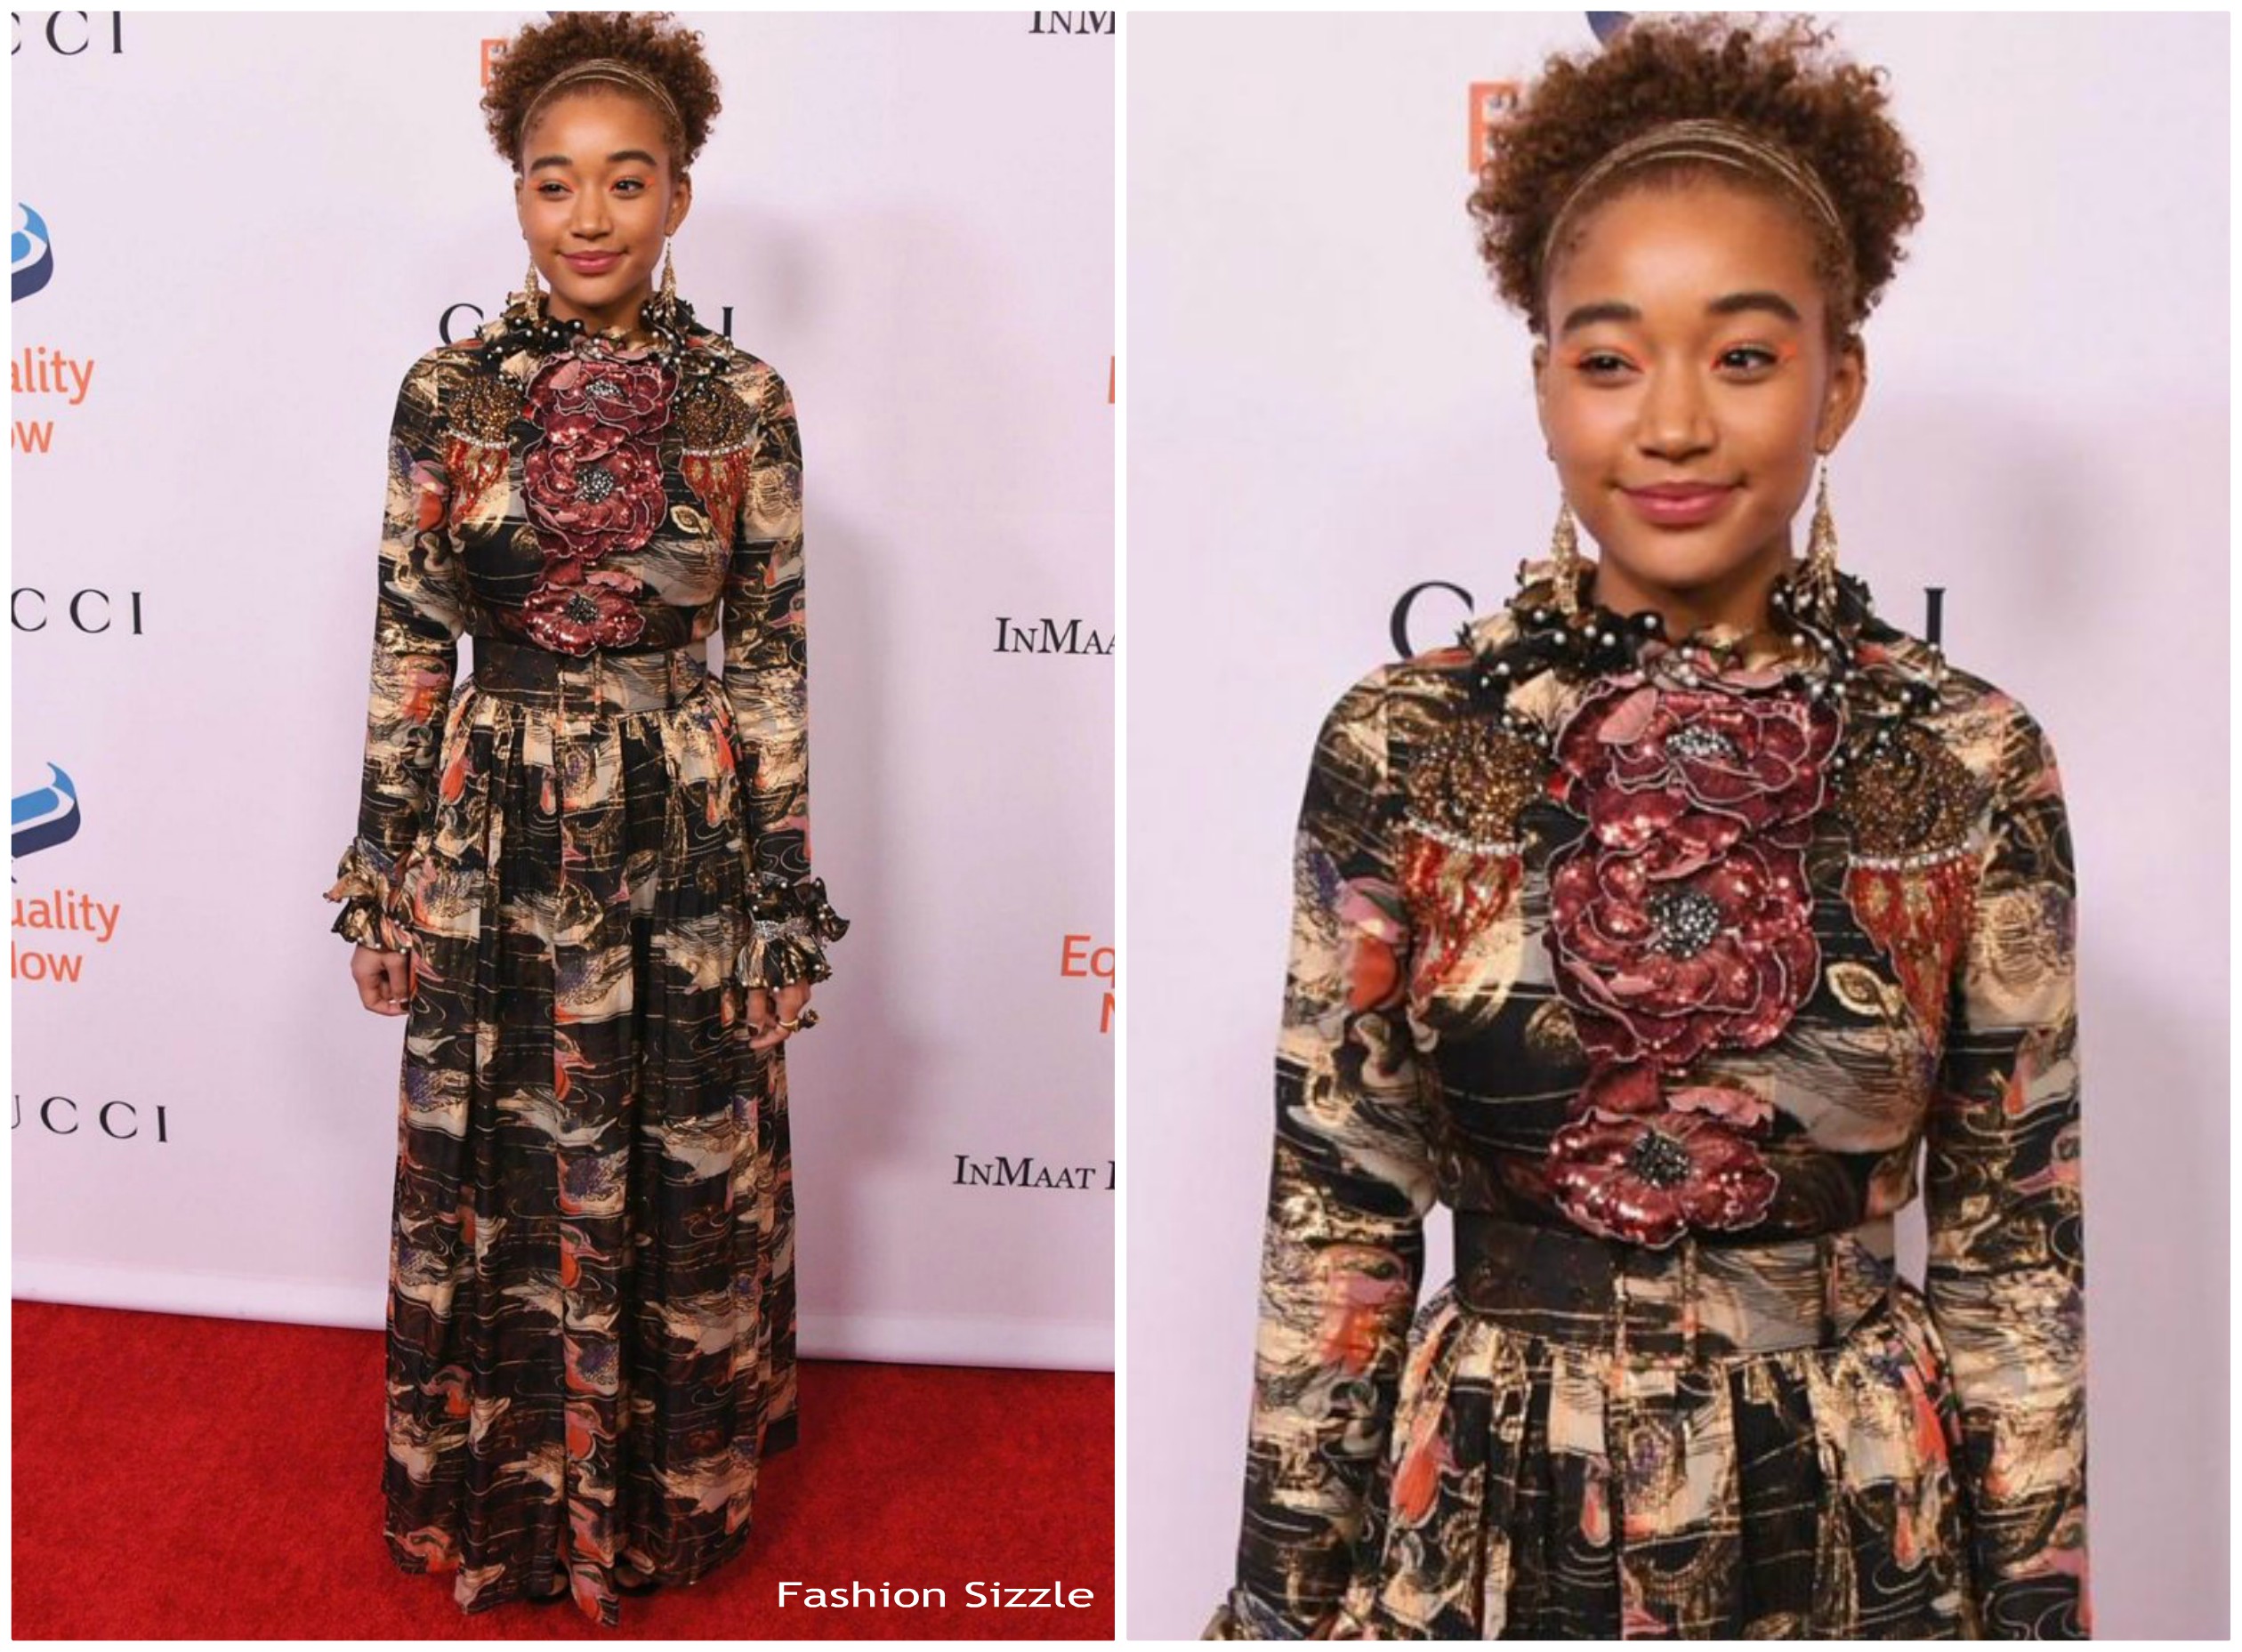 Amandla Stenberg In  Gucci  @ Equality Now’s Make Equality Reality Gala 2018